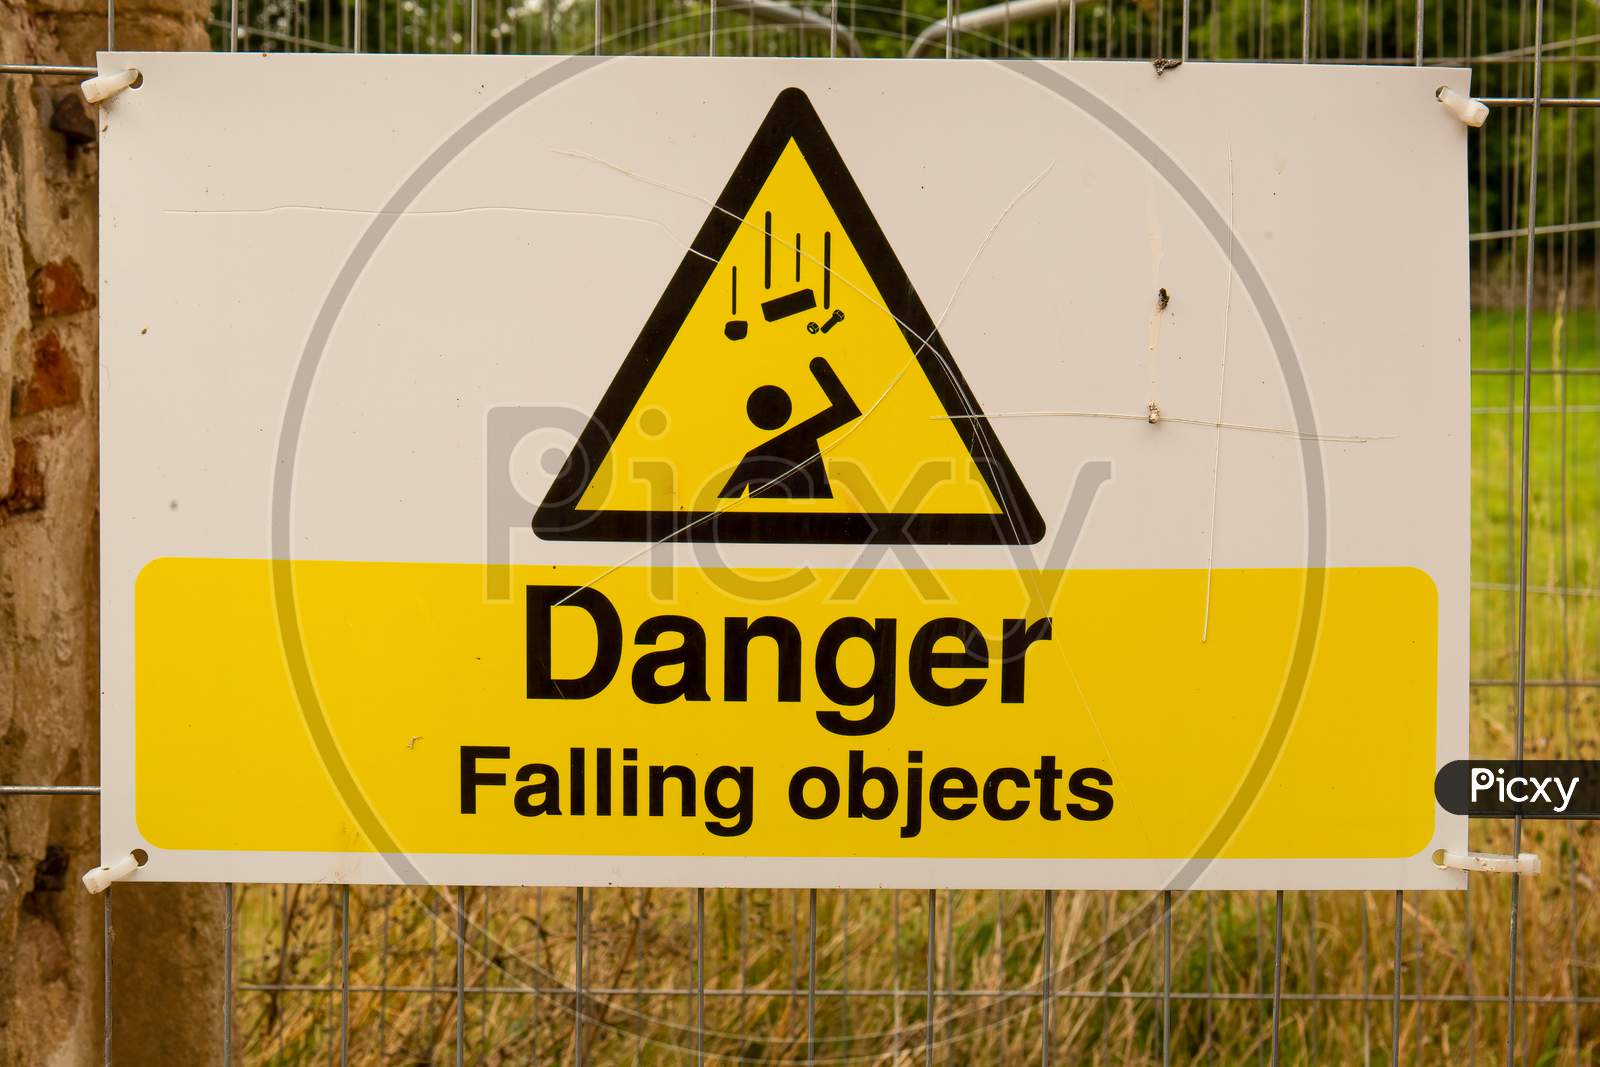 Large Danger Falling Objects Sign In Yellow And Black.